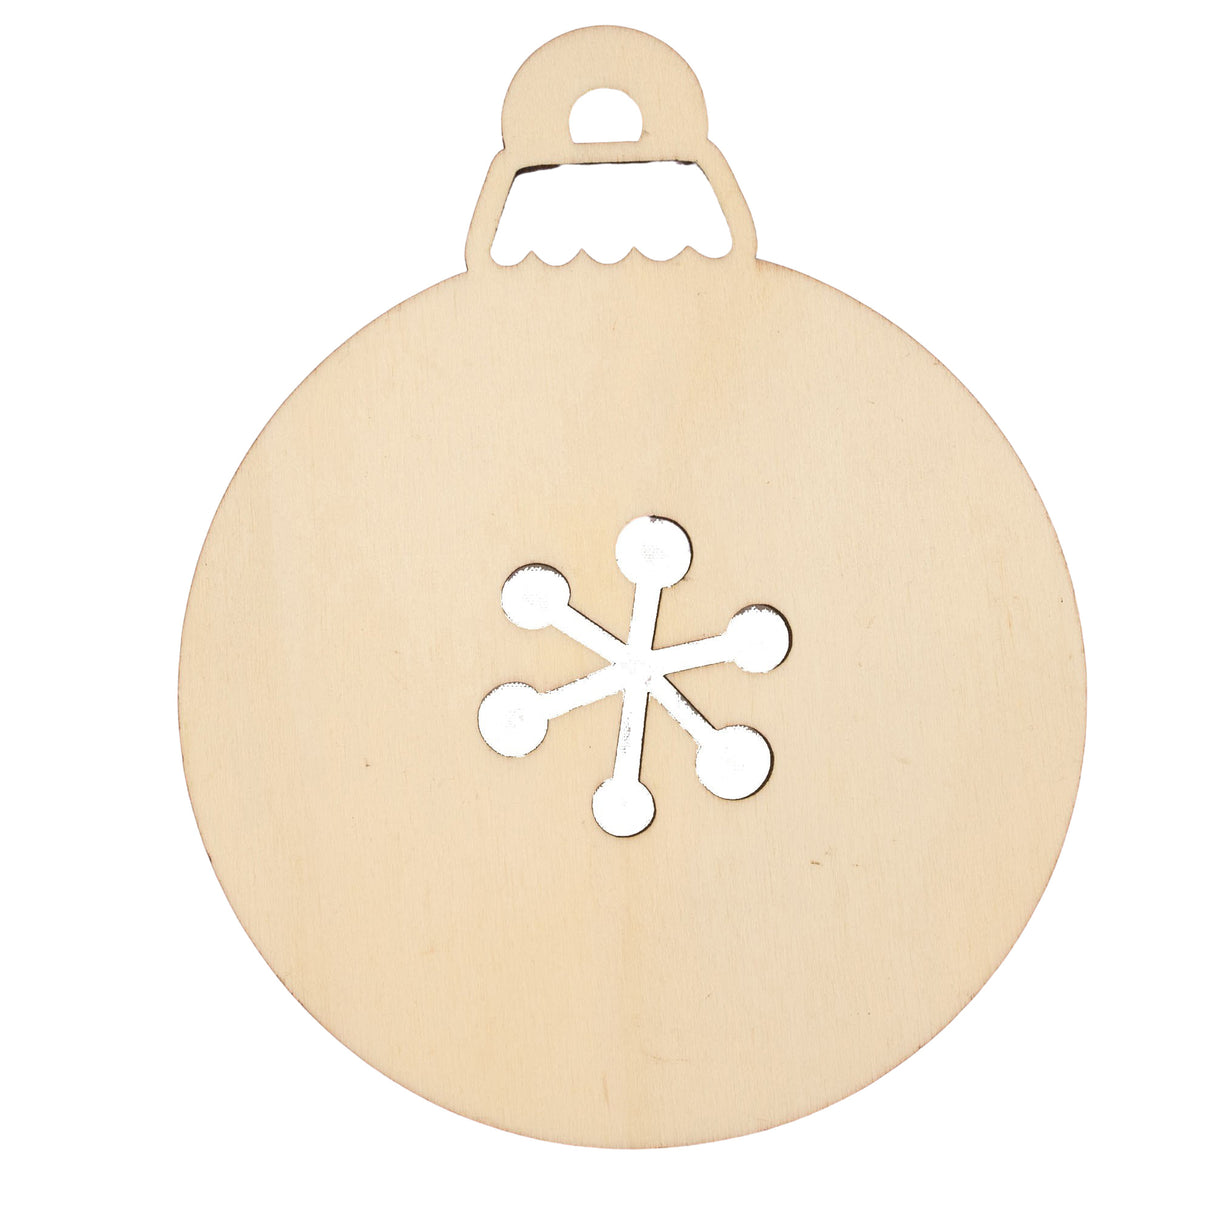 5.2-Inch DIY Unfinished Wooden Cutout Ornament in Beige color, Round shape